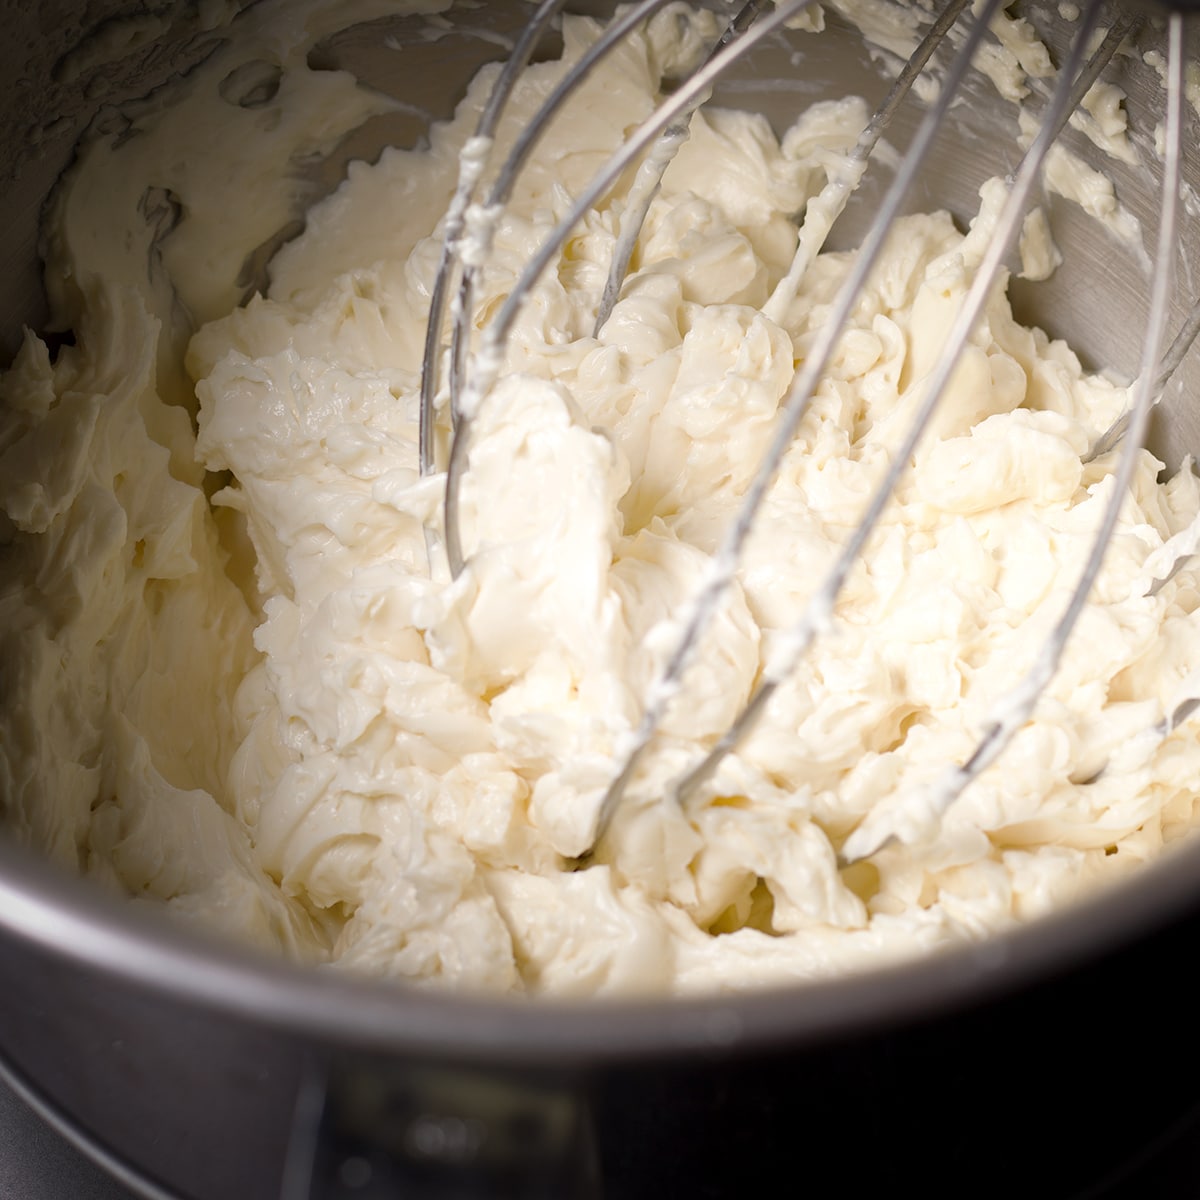 A mixer bowl filled with white chocolate ganache buttercream that's ready to use.